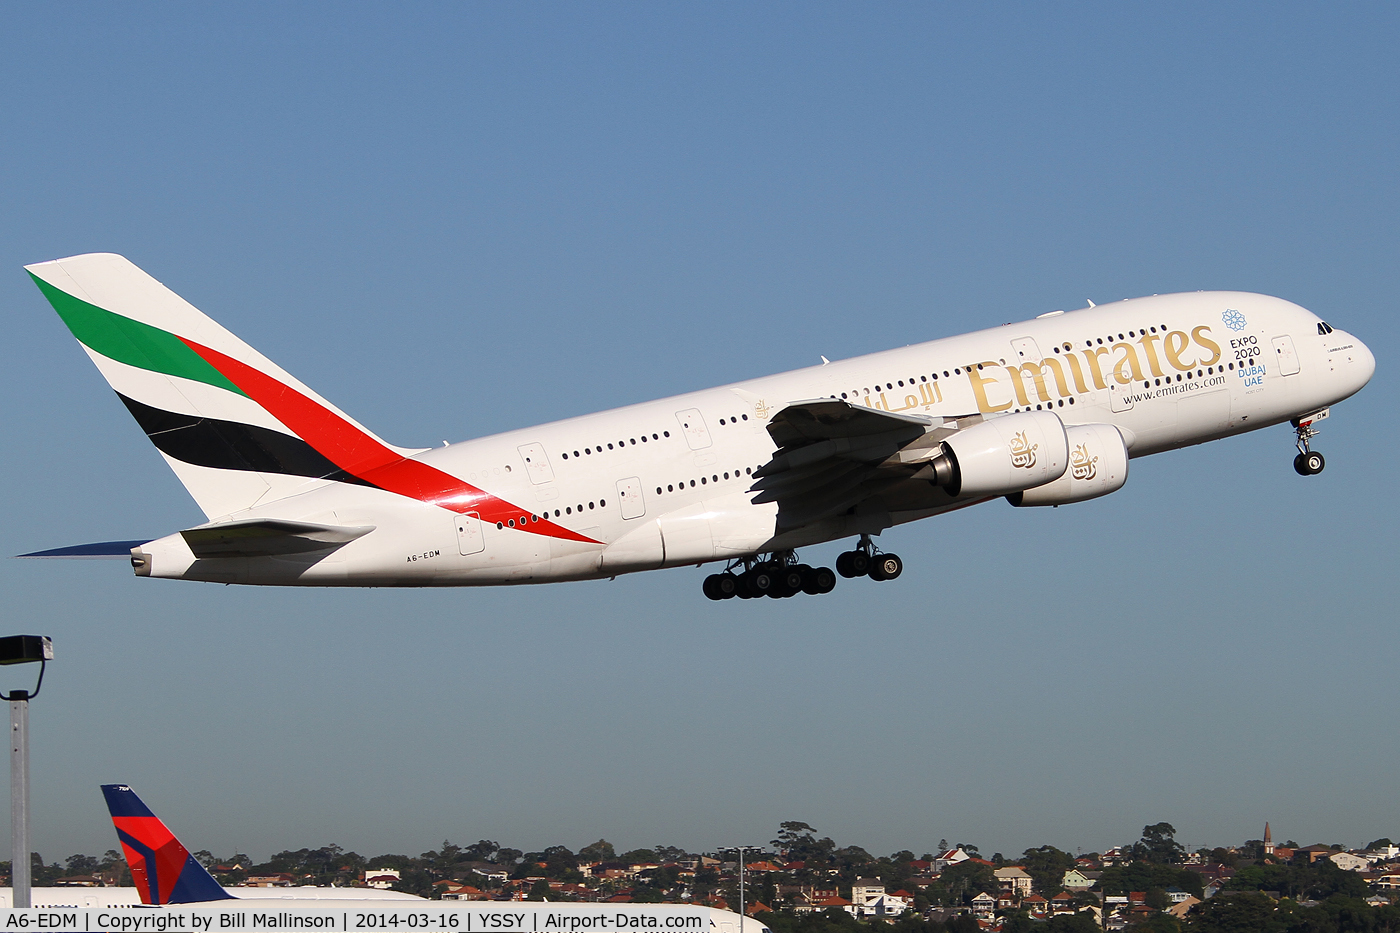 A6-EDM, 2010 Airbus A380-861 C/N 042, away from 34L